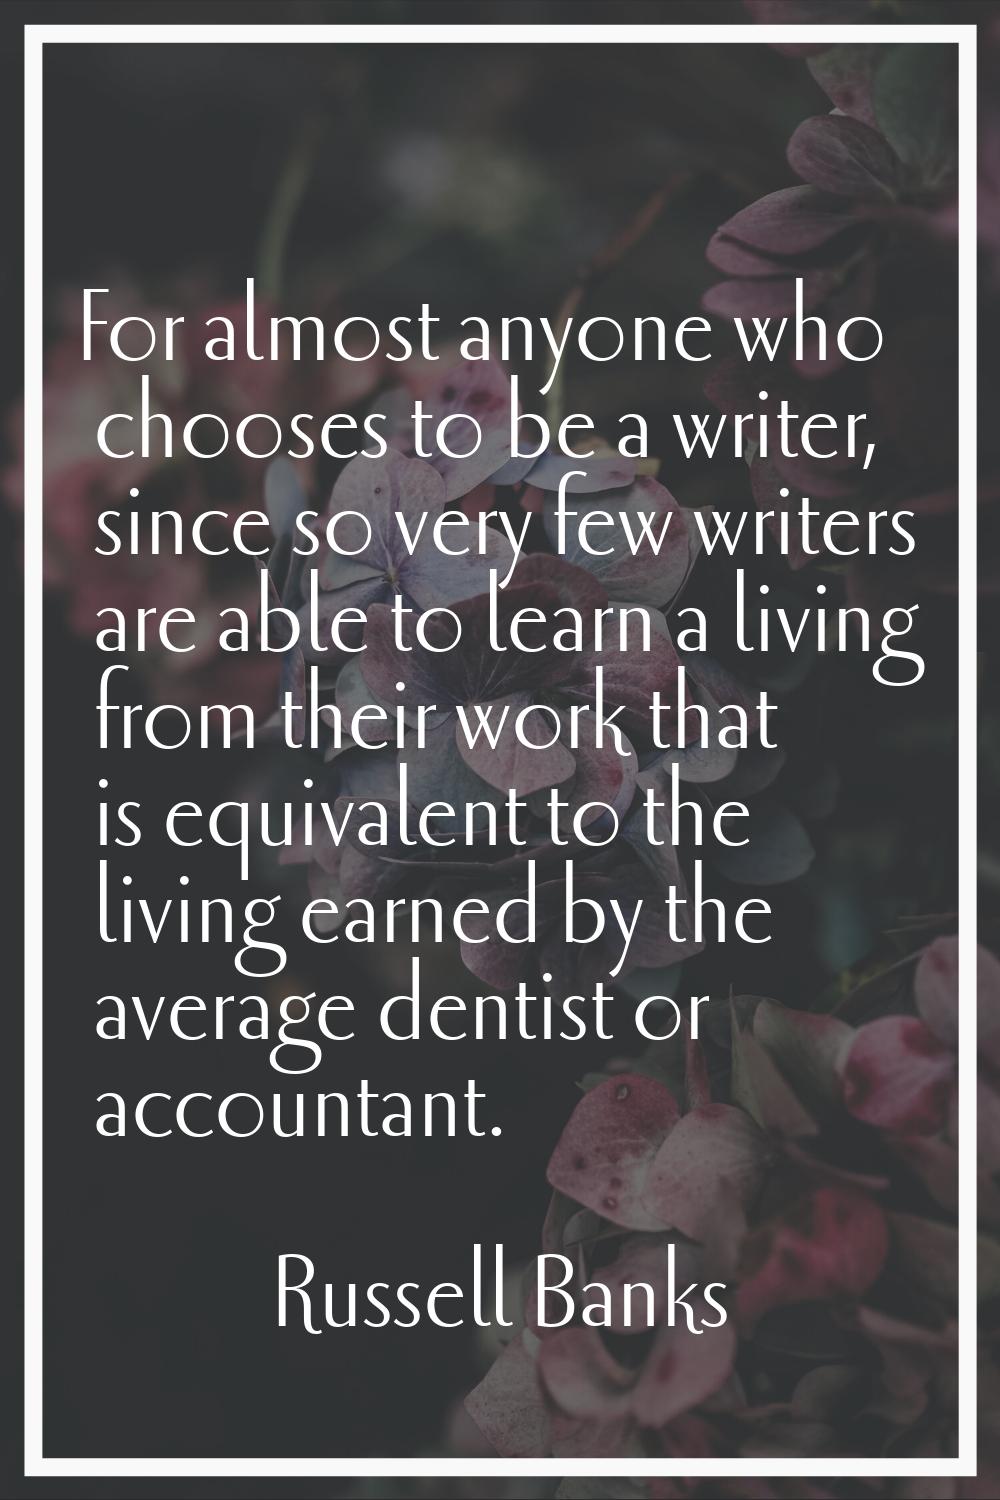 For almost anyone who chooses to be a writer, since so very few writers are able to learn a living 